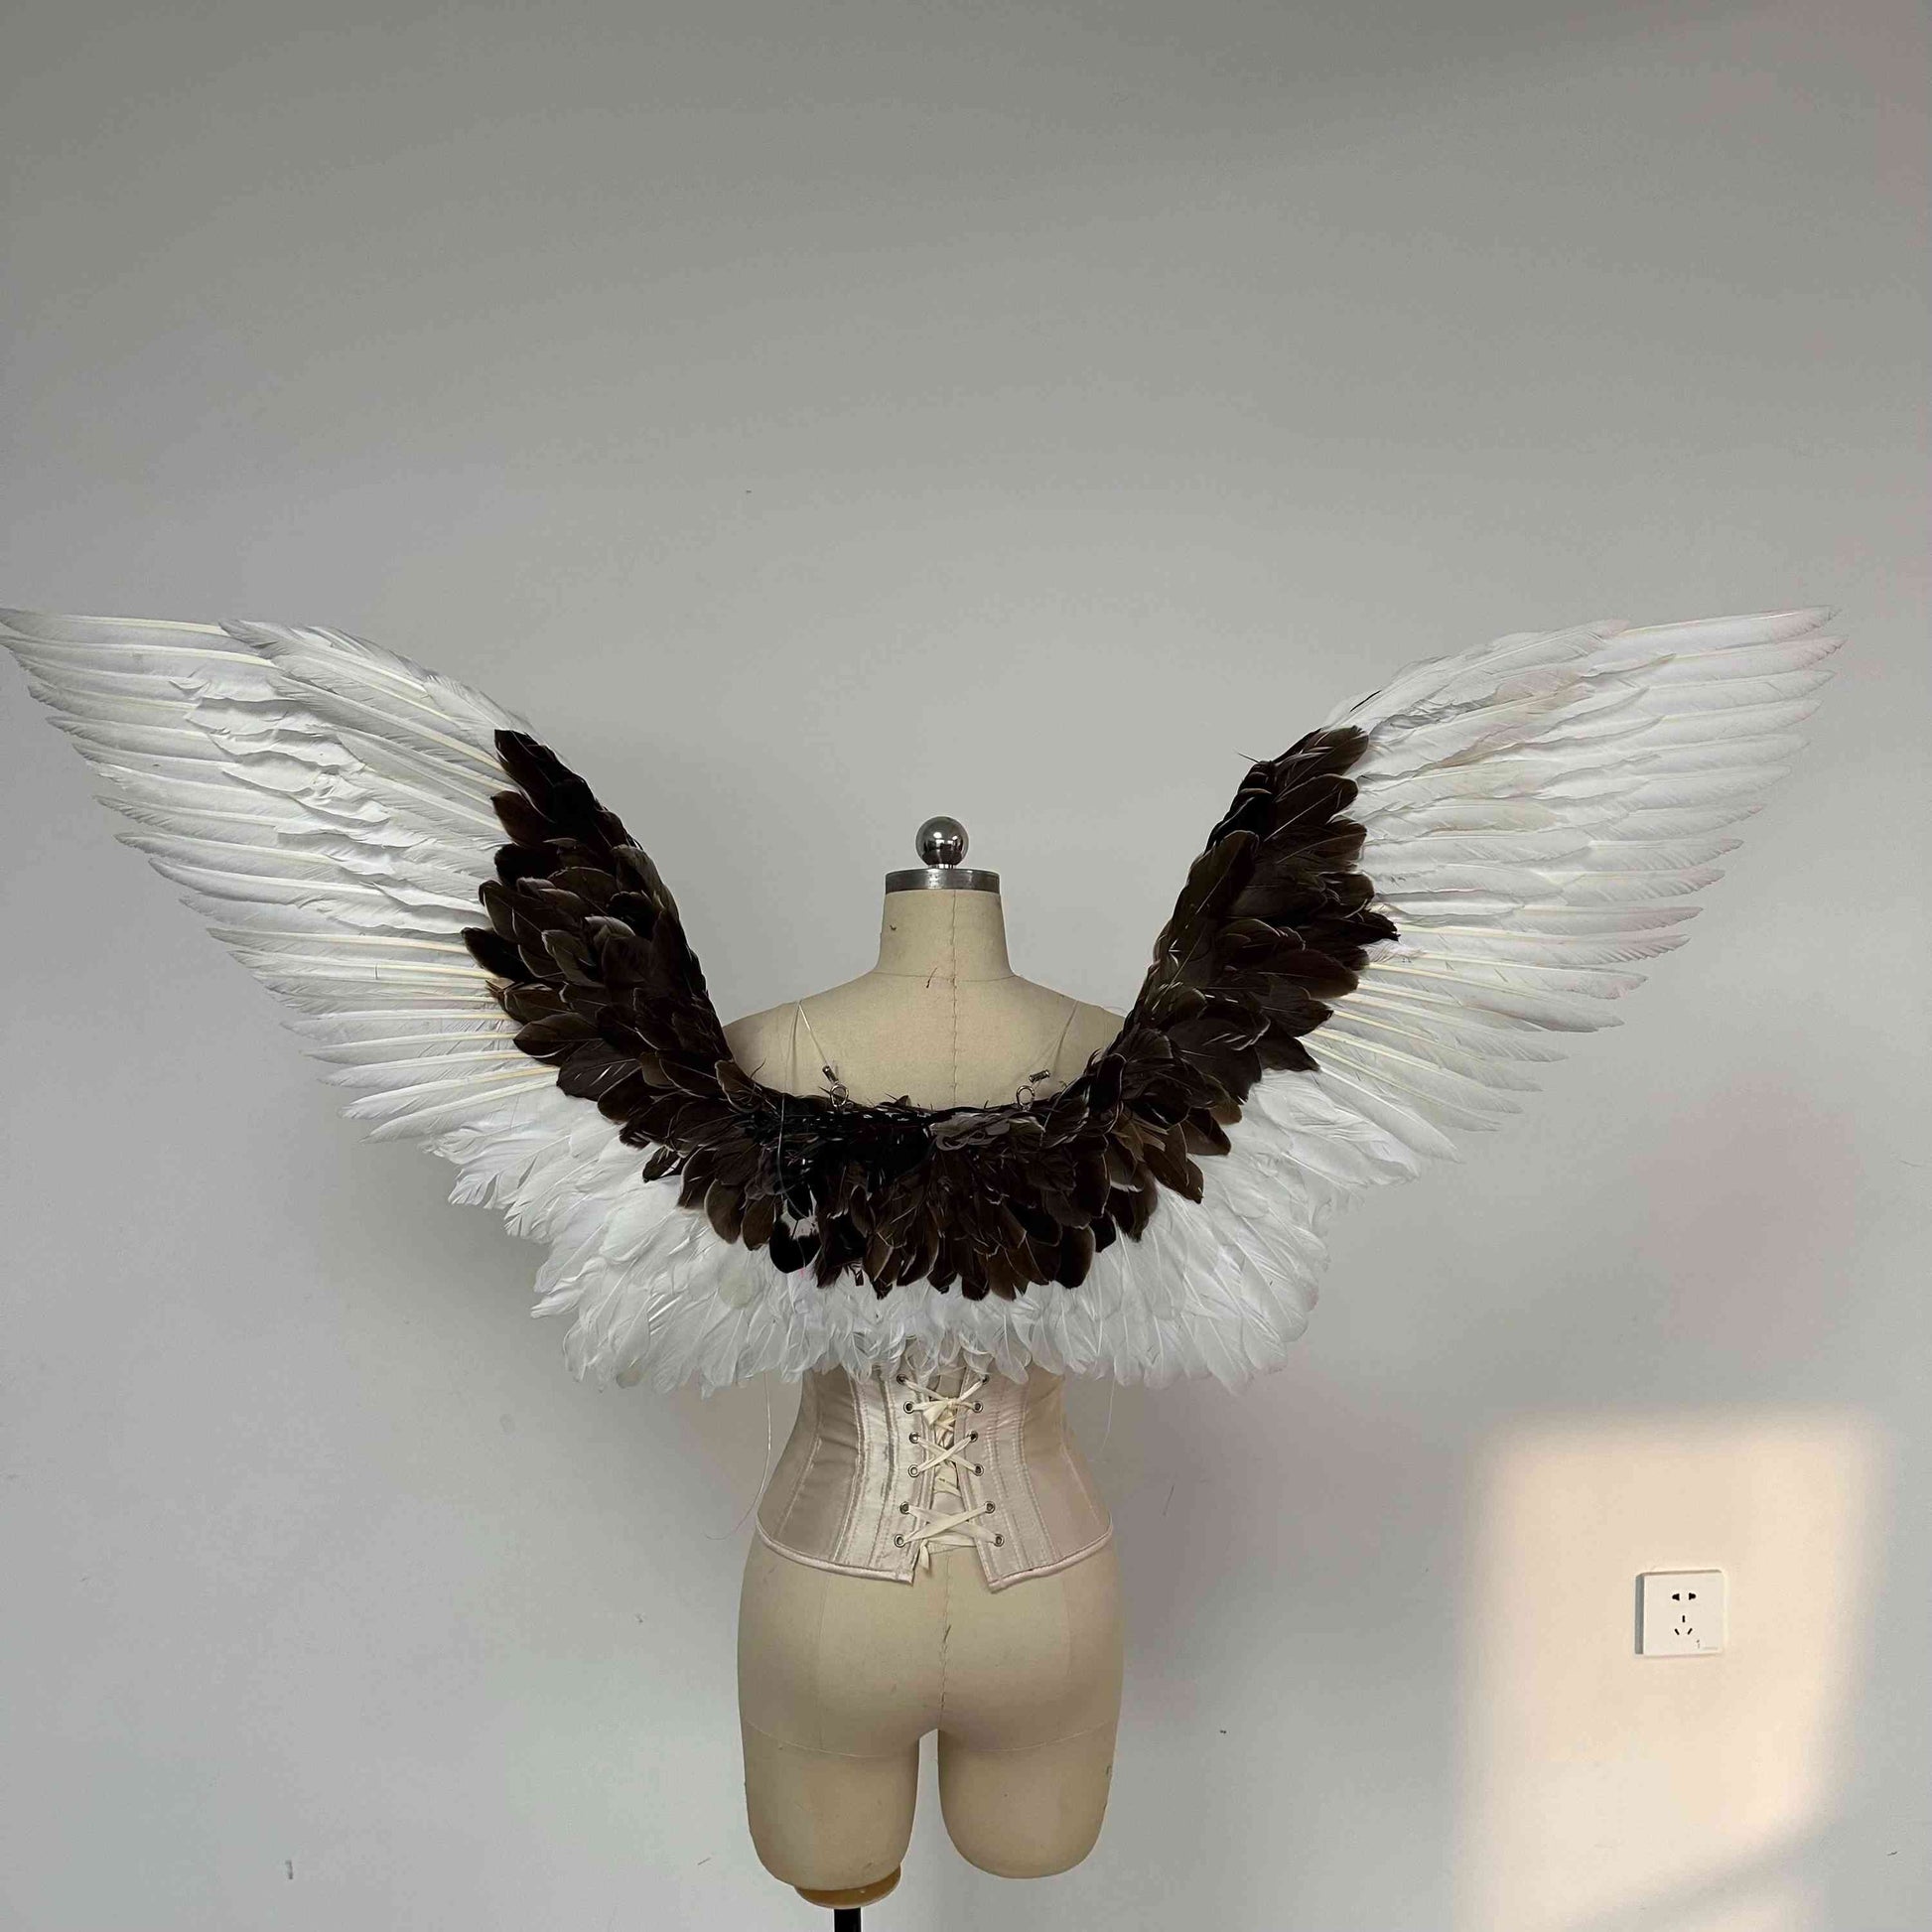 Our white gray angel wings from the back. Made from goose feathers. Wings for angel wings costume. Suitable for photoshoots.